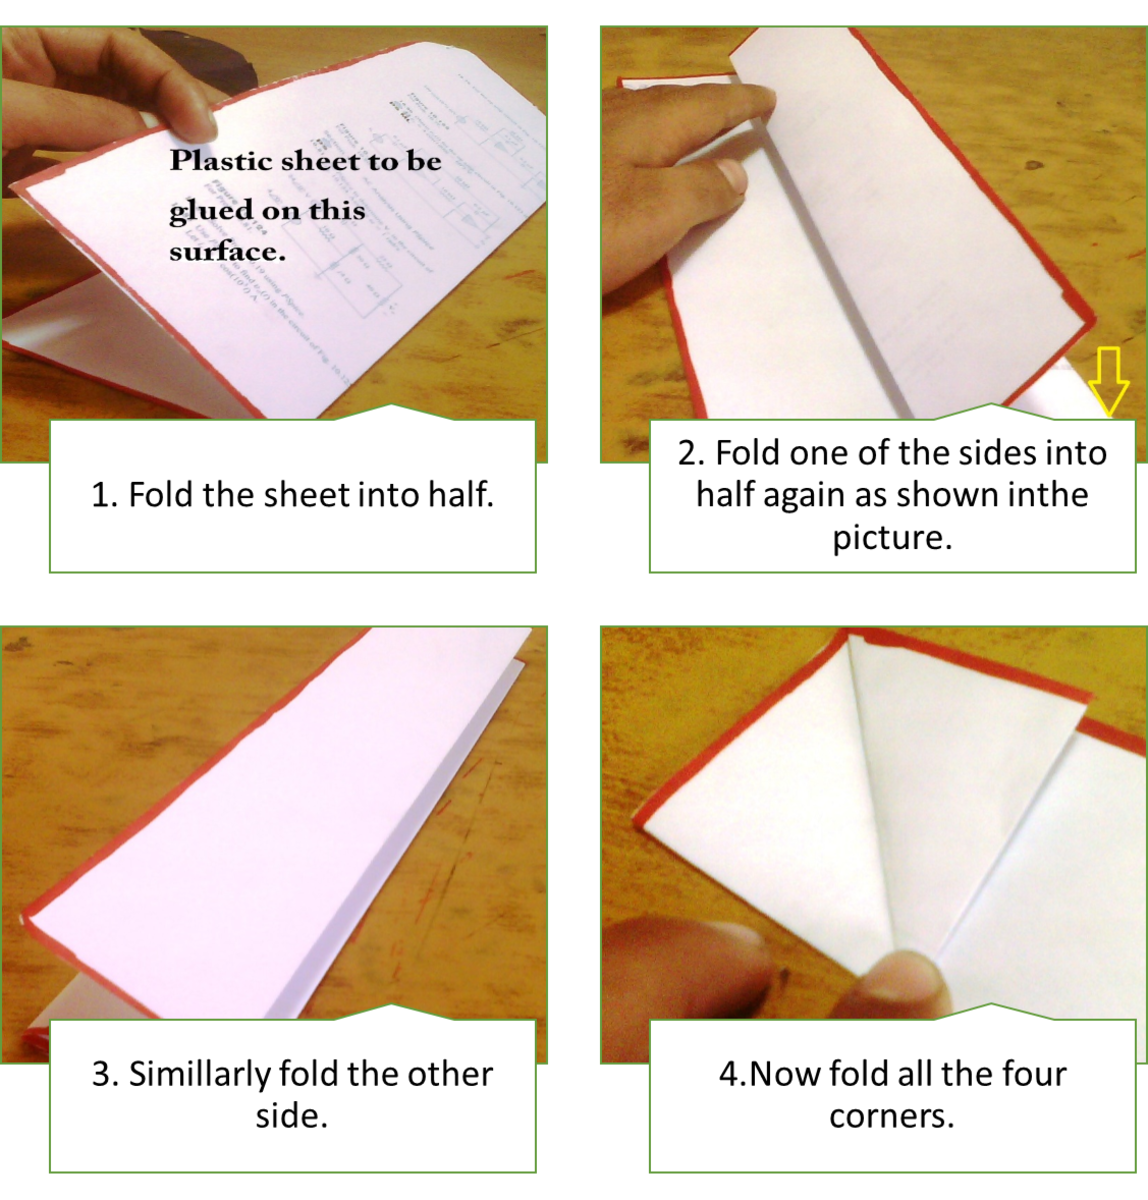 How to make a paper boat.